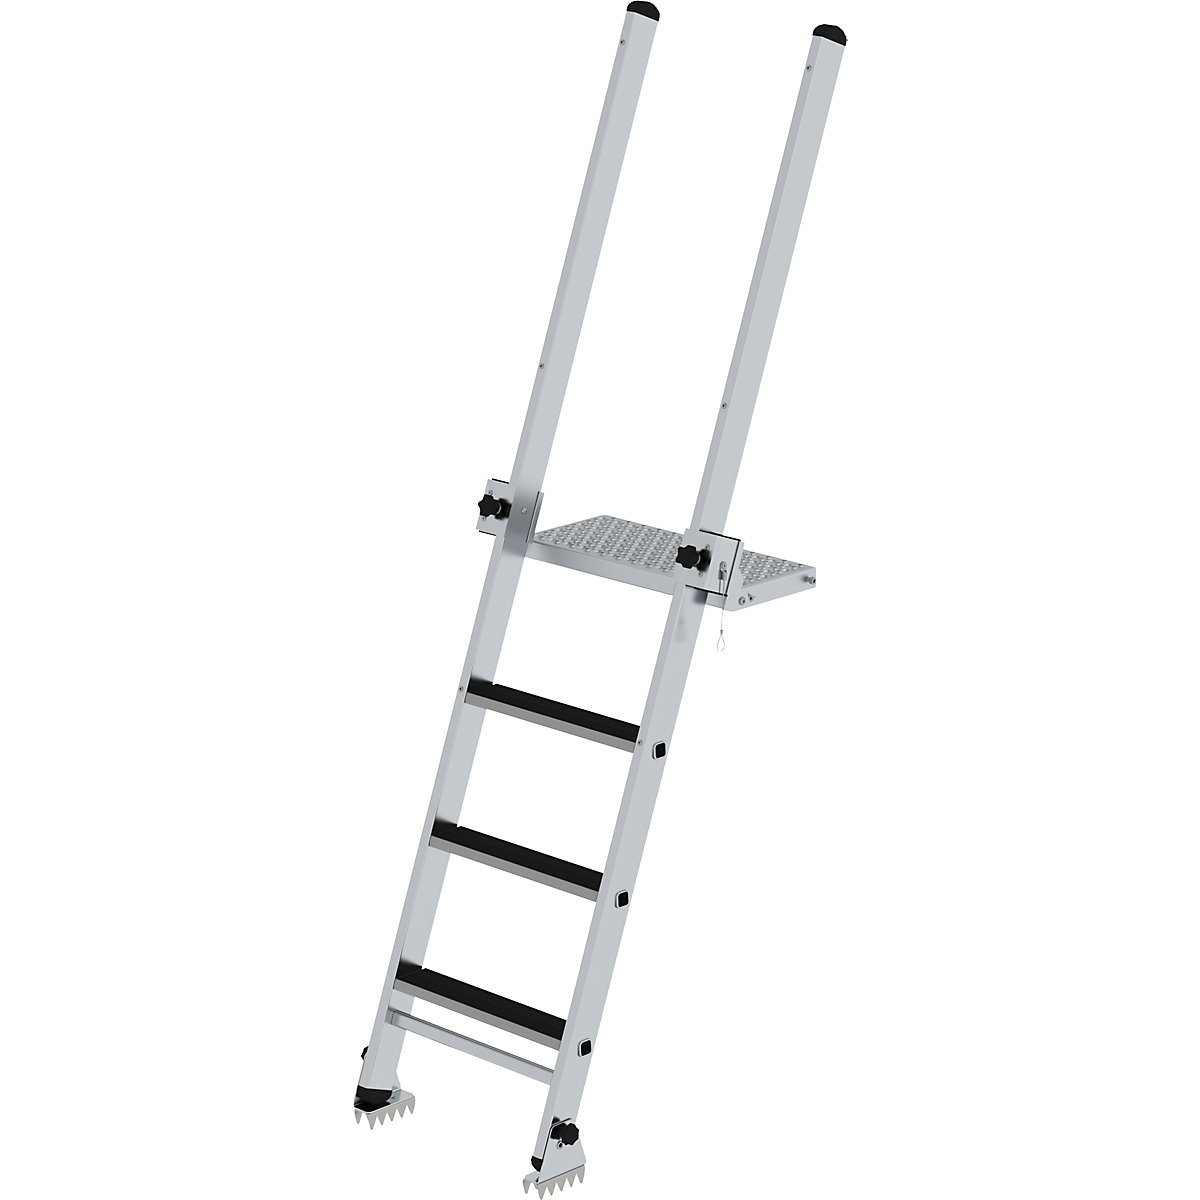 Pit ladder with steps - MUNK